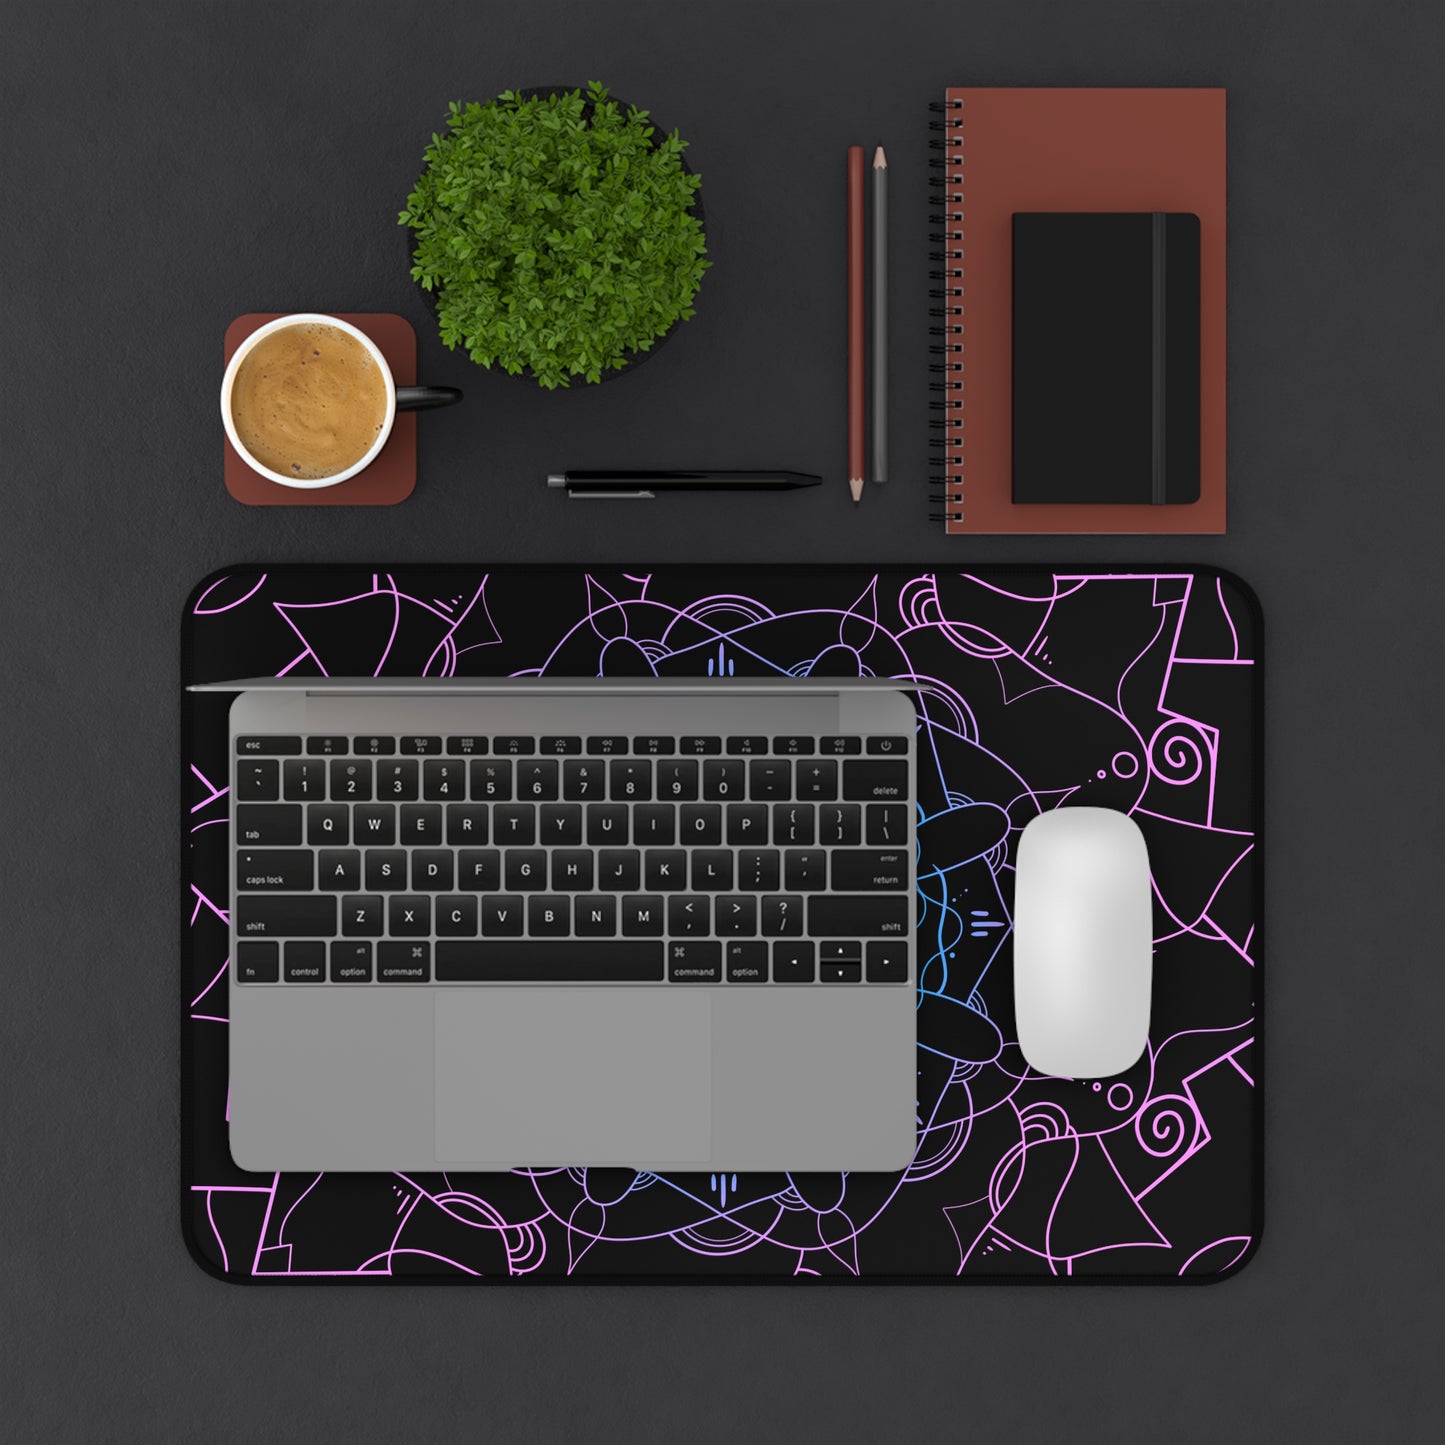 A 12" x 18" desk mat with a pink and blue mandala pattern on a black background. A laptop and mouse sit on top of it.